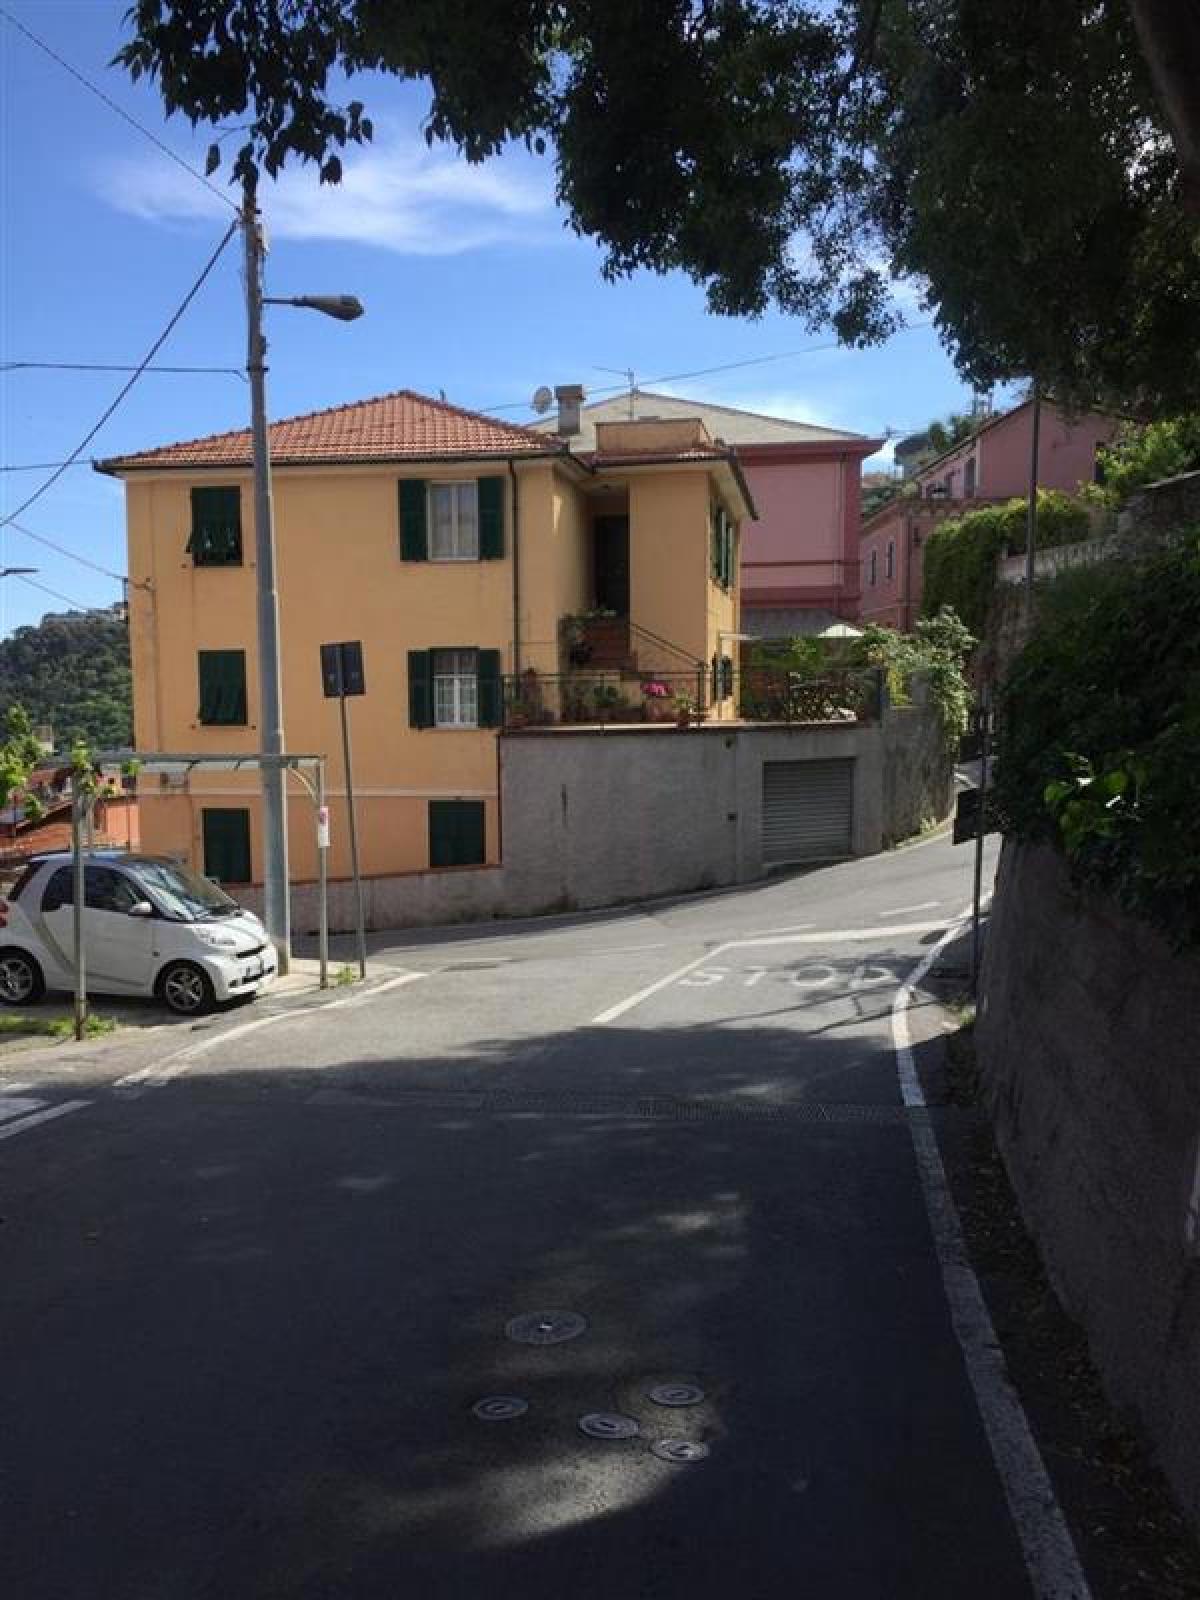 Picture of Home For Sale in Bergeggi, Pomorskie, Italy